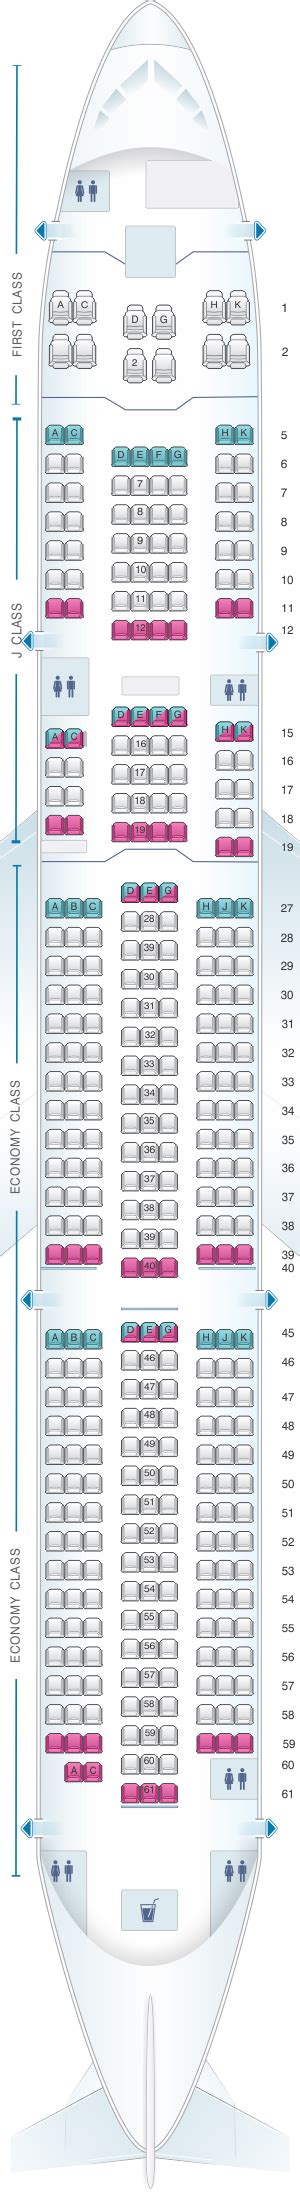 japan airlines a350 seat map